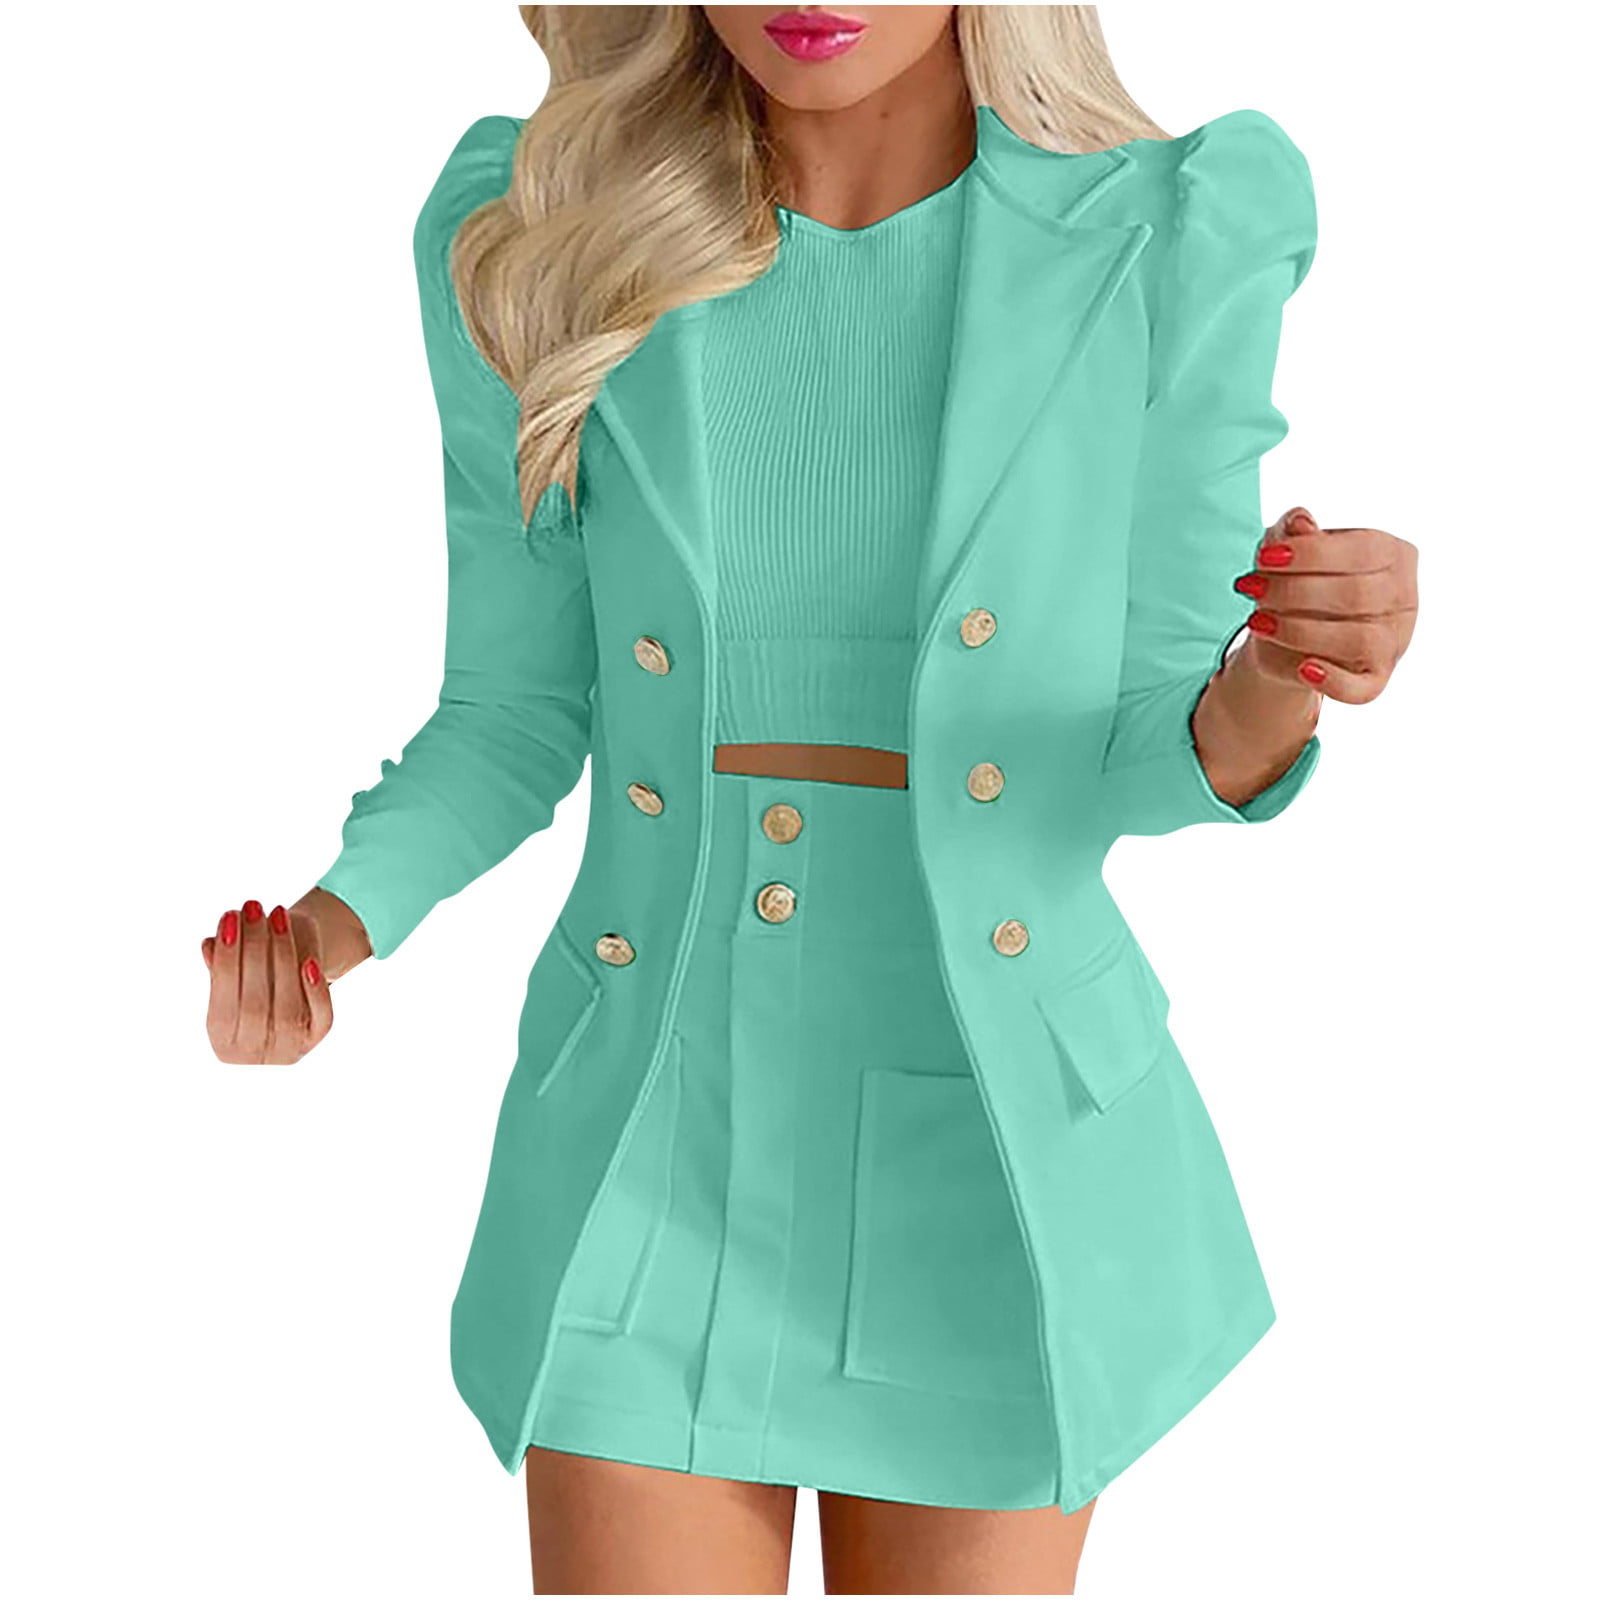 zanvin Going Out Outfits for Women Clearance,Fashion Women Summer Button  Short Suit Casual Long Sleeve + Skirt Suit Set,Hot Pink,L